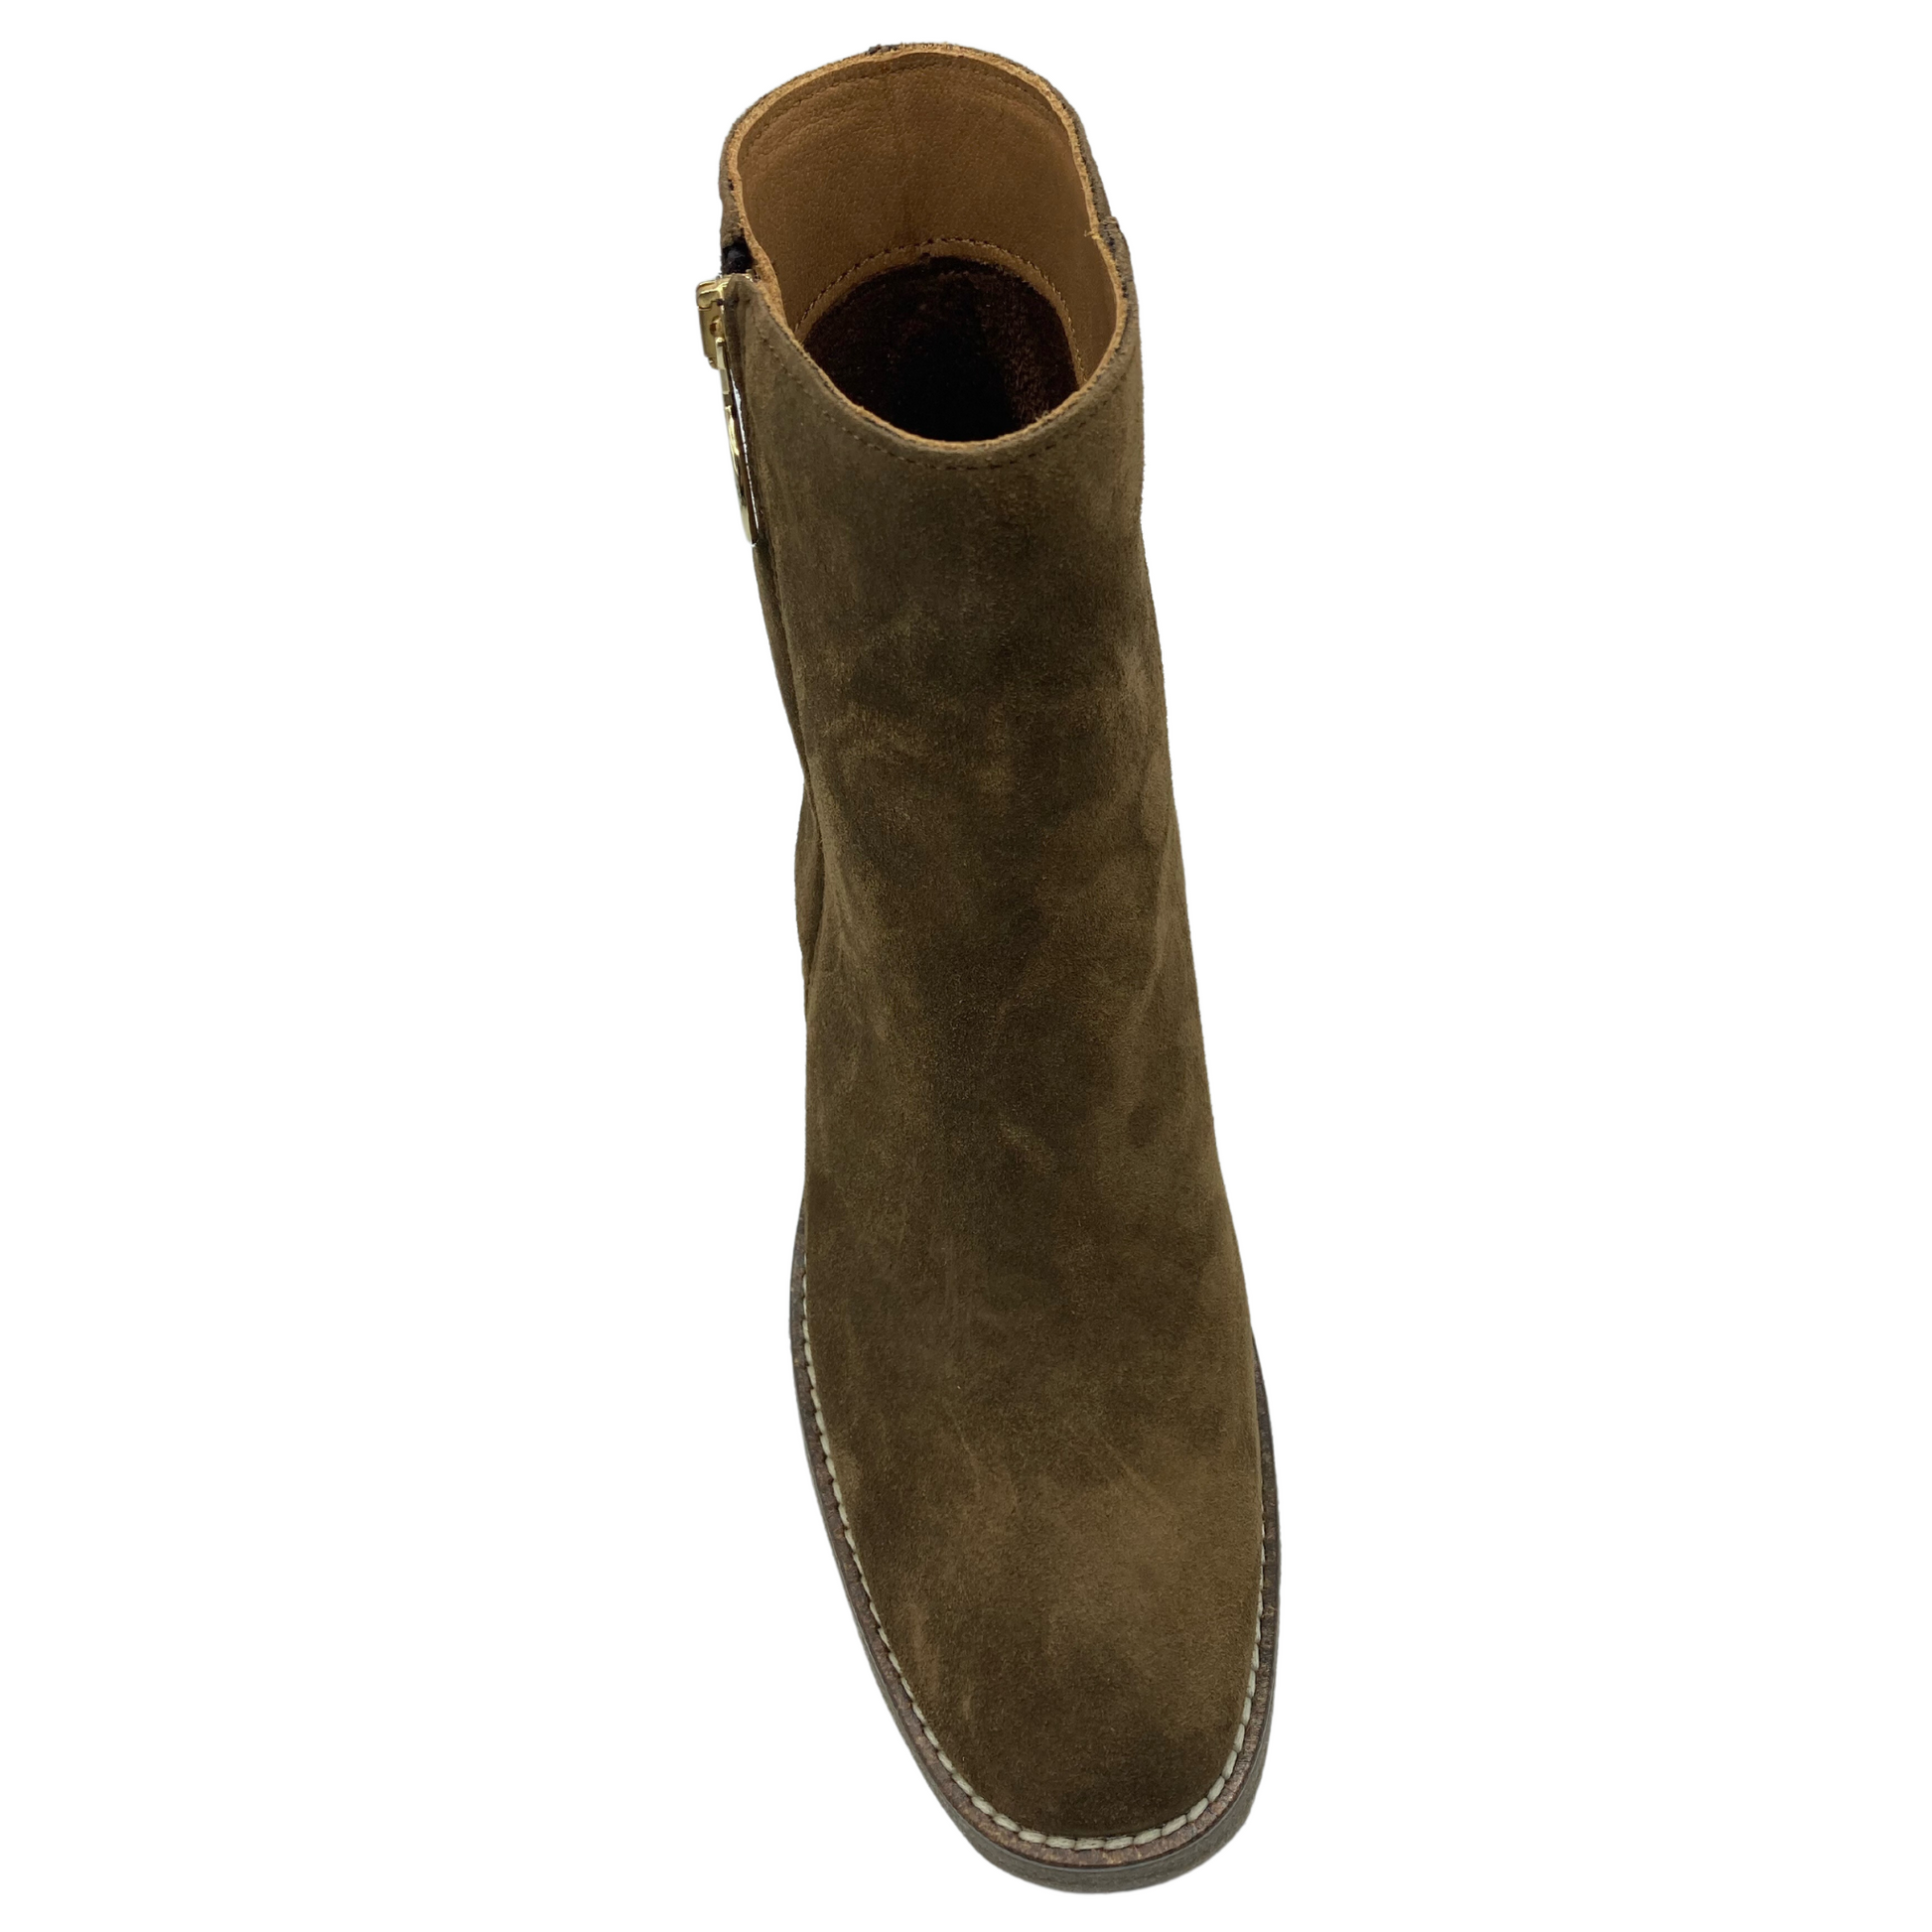 Top view of brown suede short boot with rounded toe and textile lining